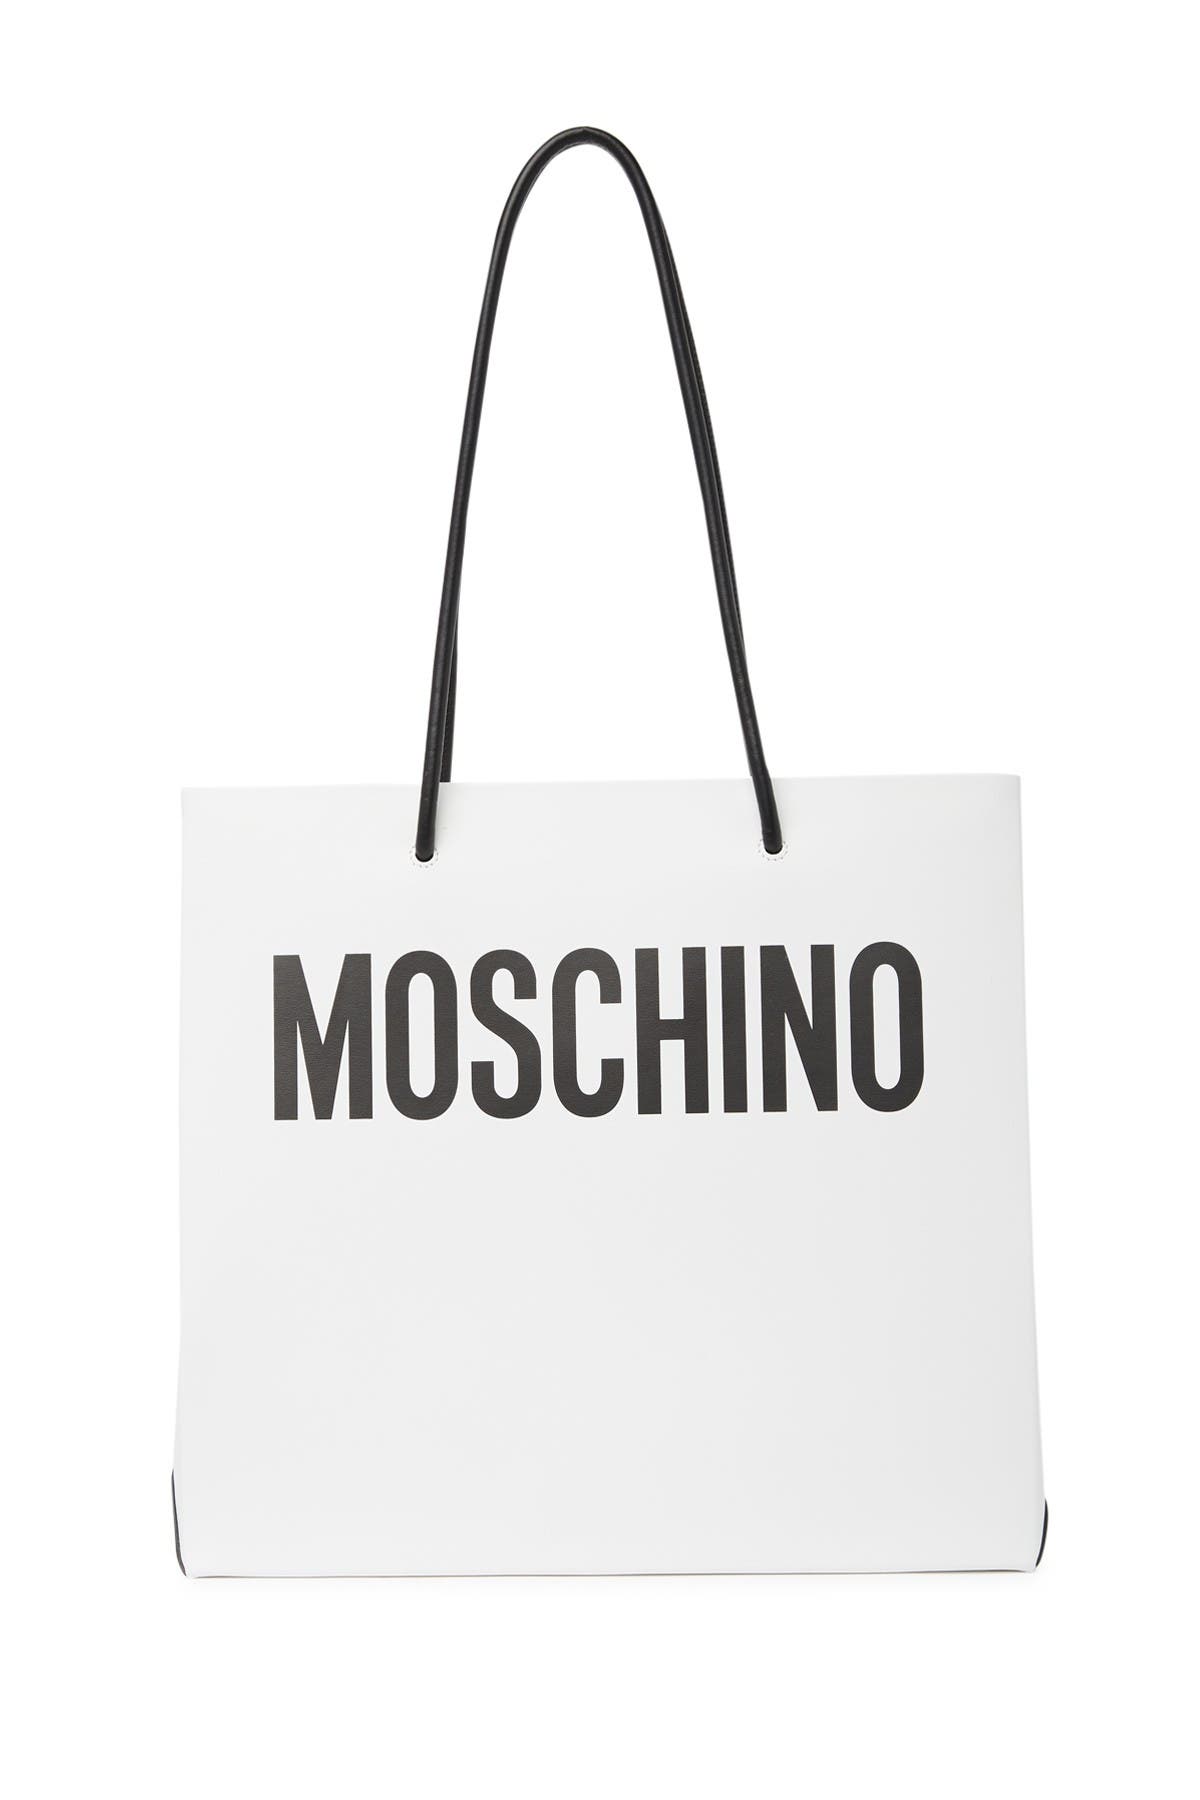 moschino leather tote